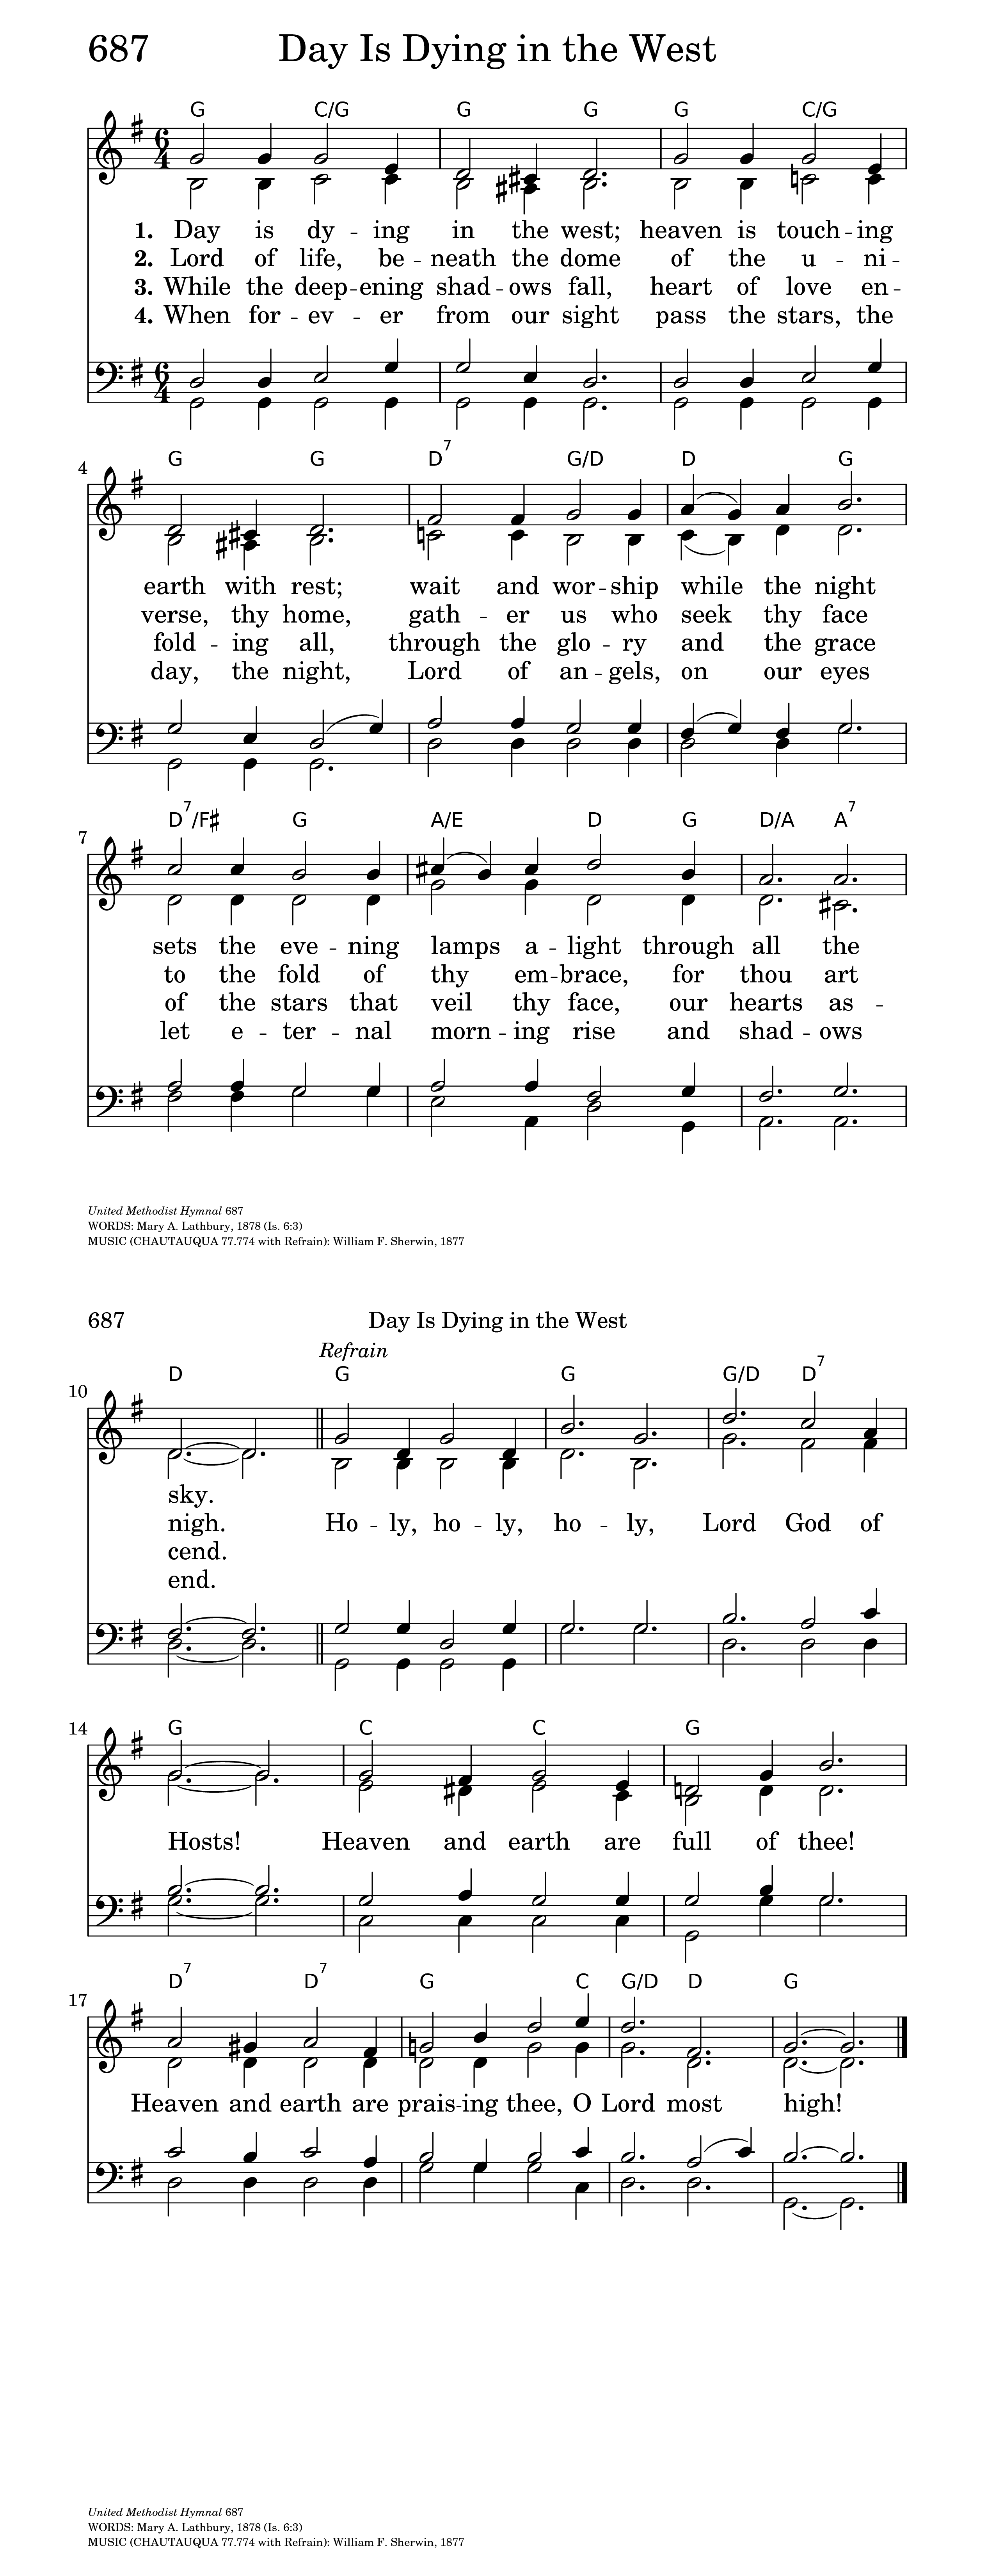 The United Methodist Hymnal 687. Day is dying in the west | Hymnary.org